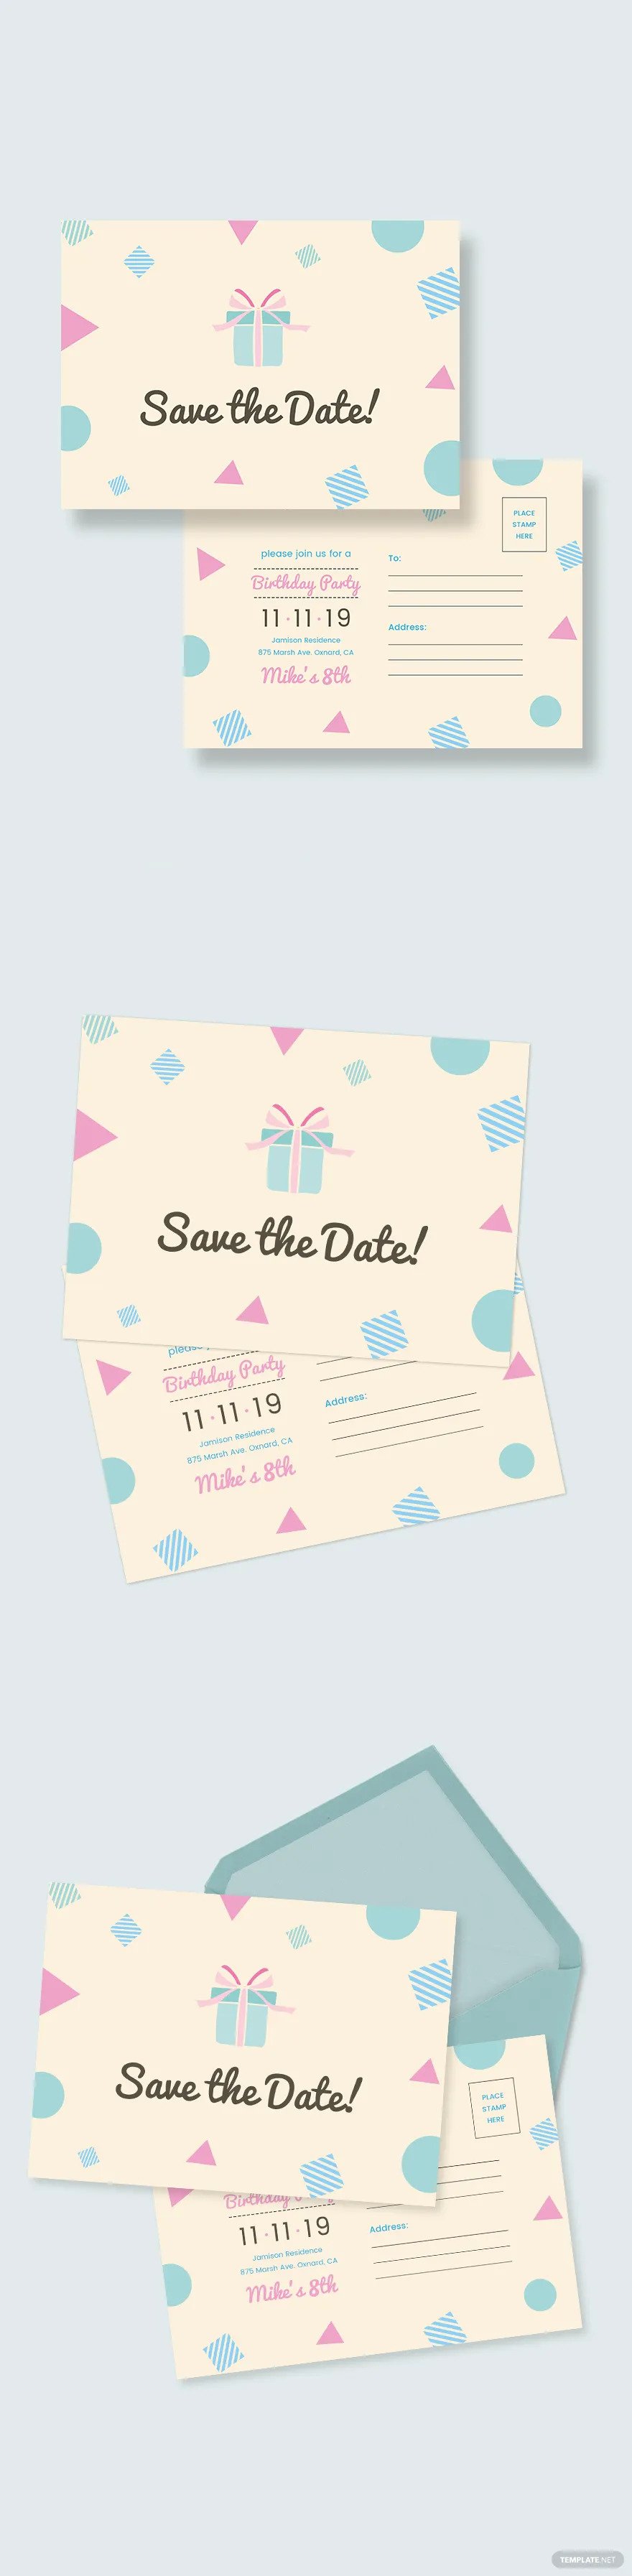 save-the-date-postcard